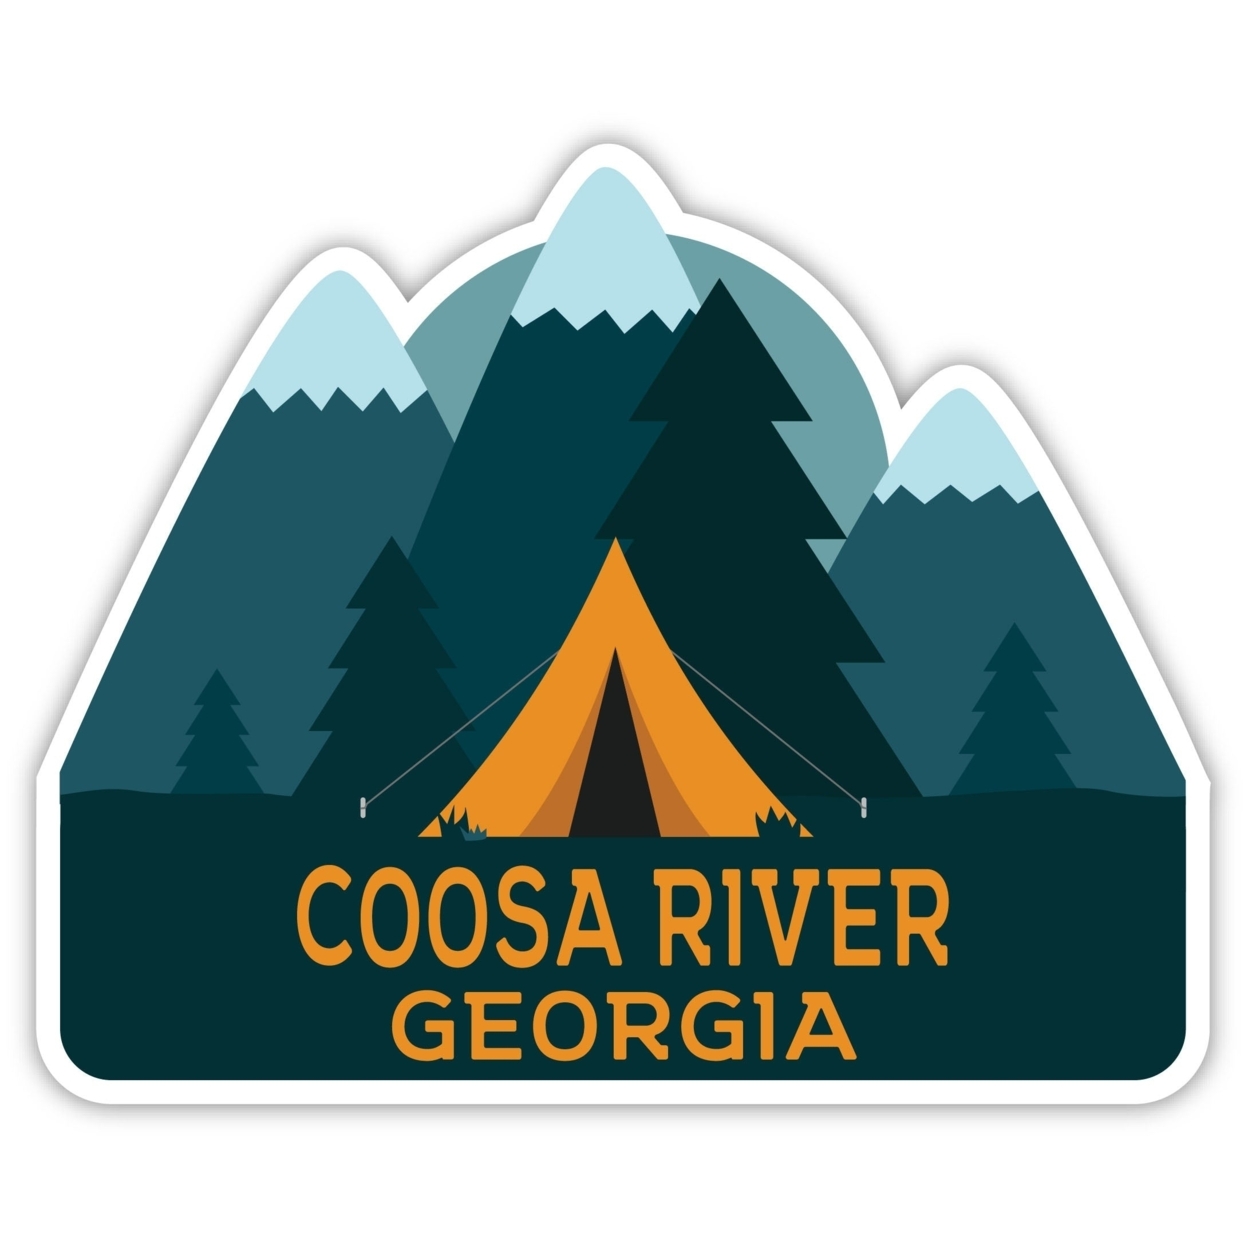 Coosa River Georgia Souvenir Decorative Stickers (Choose Theme And Size) - 4-Pack, 10-Inch, Tent